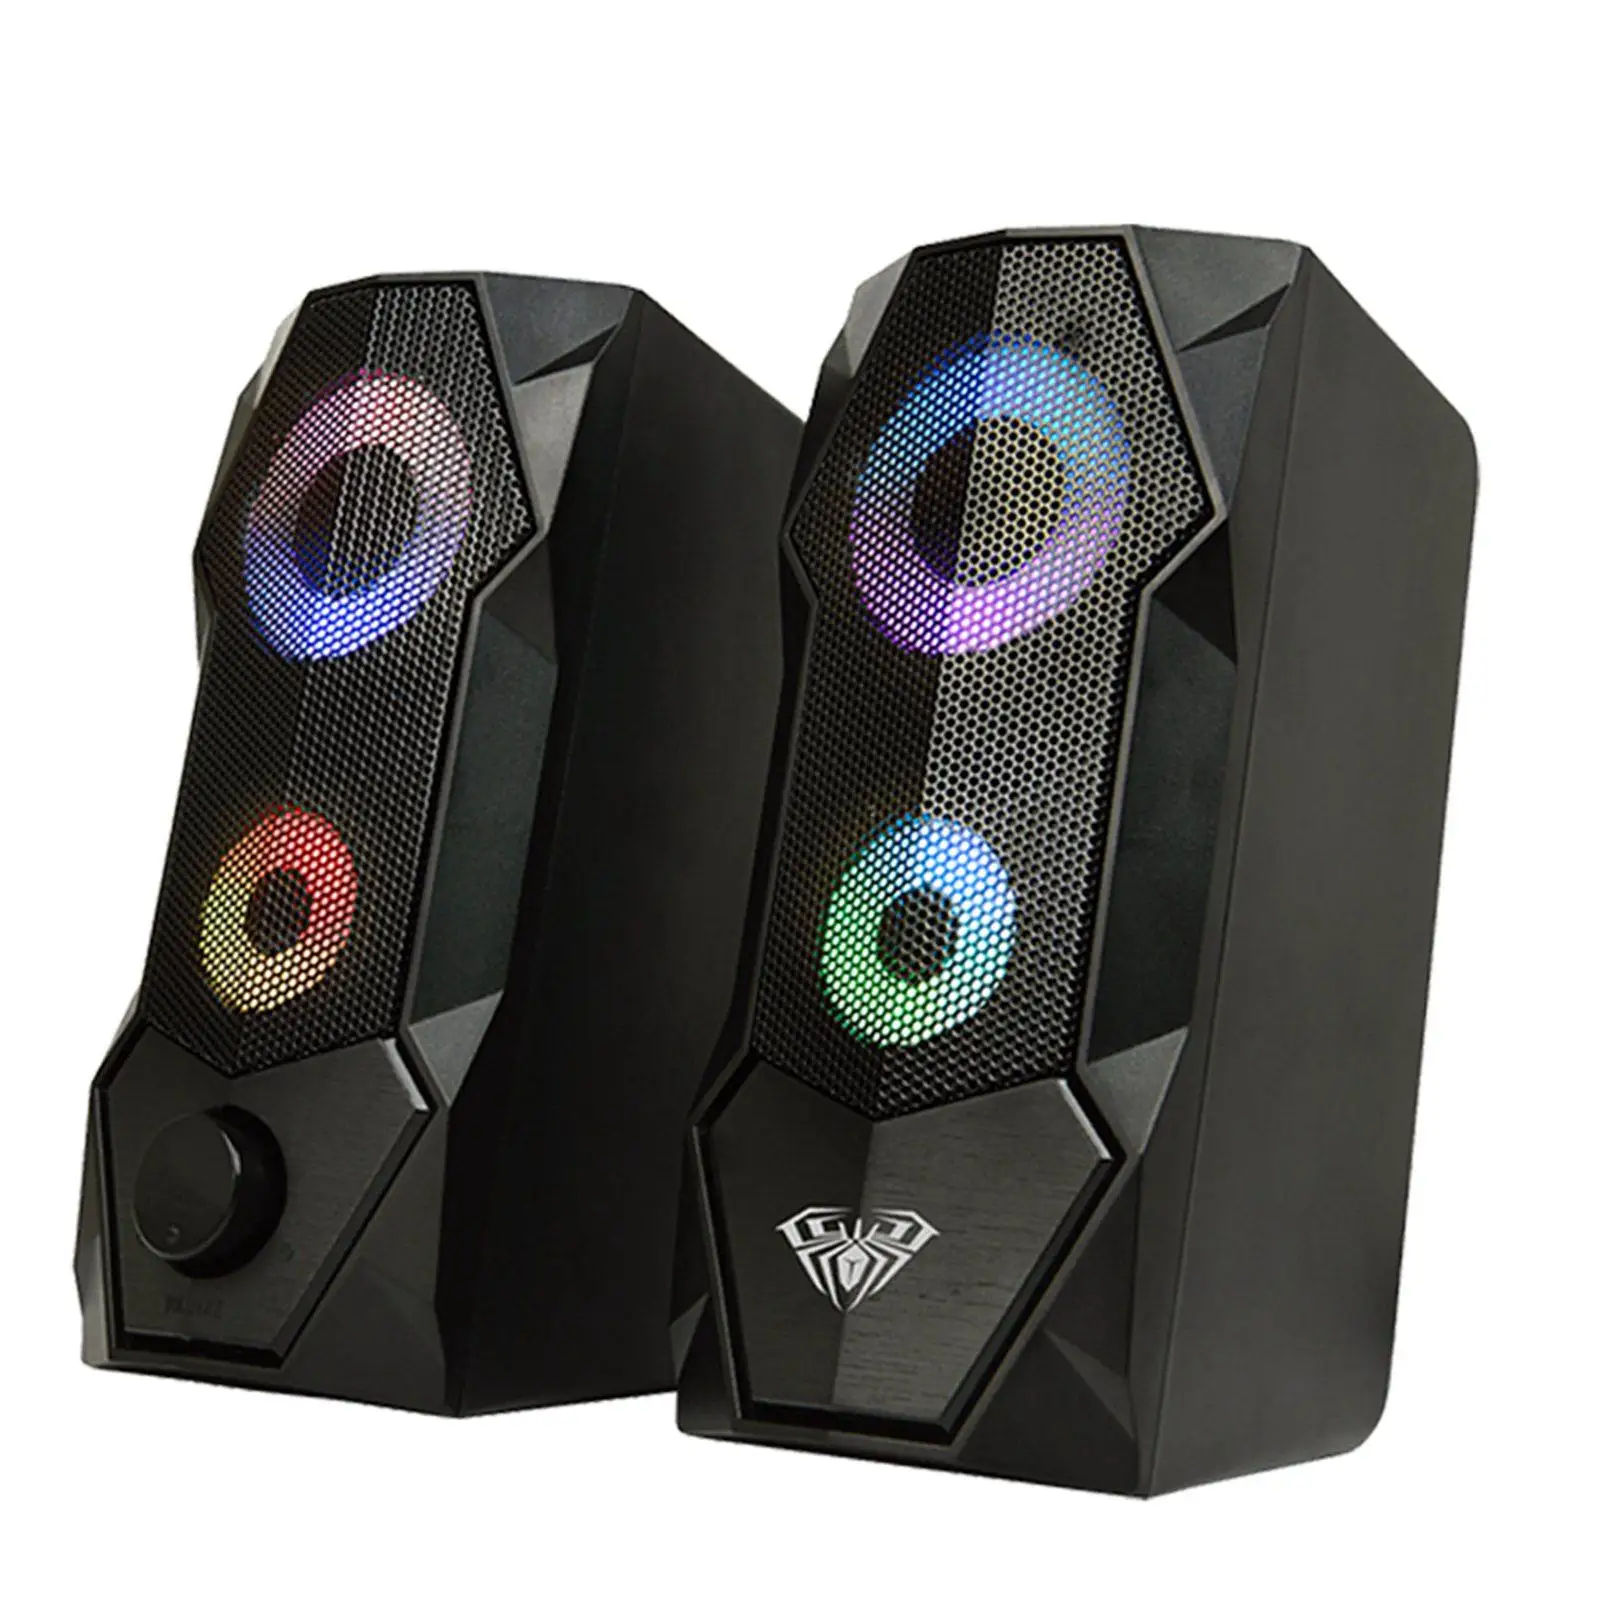 2 Pieces Computer Speakers with RGB Light Stereo Surround for Phone Desktops